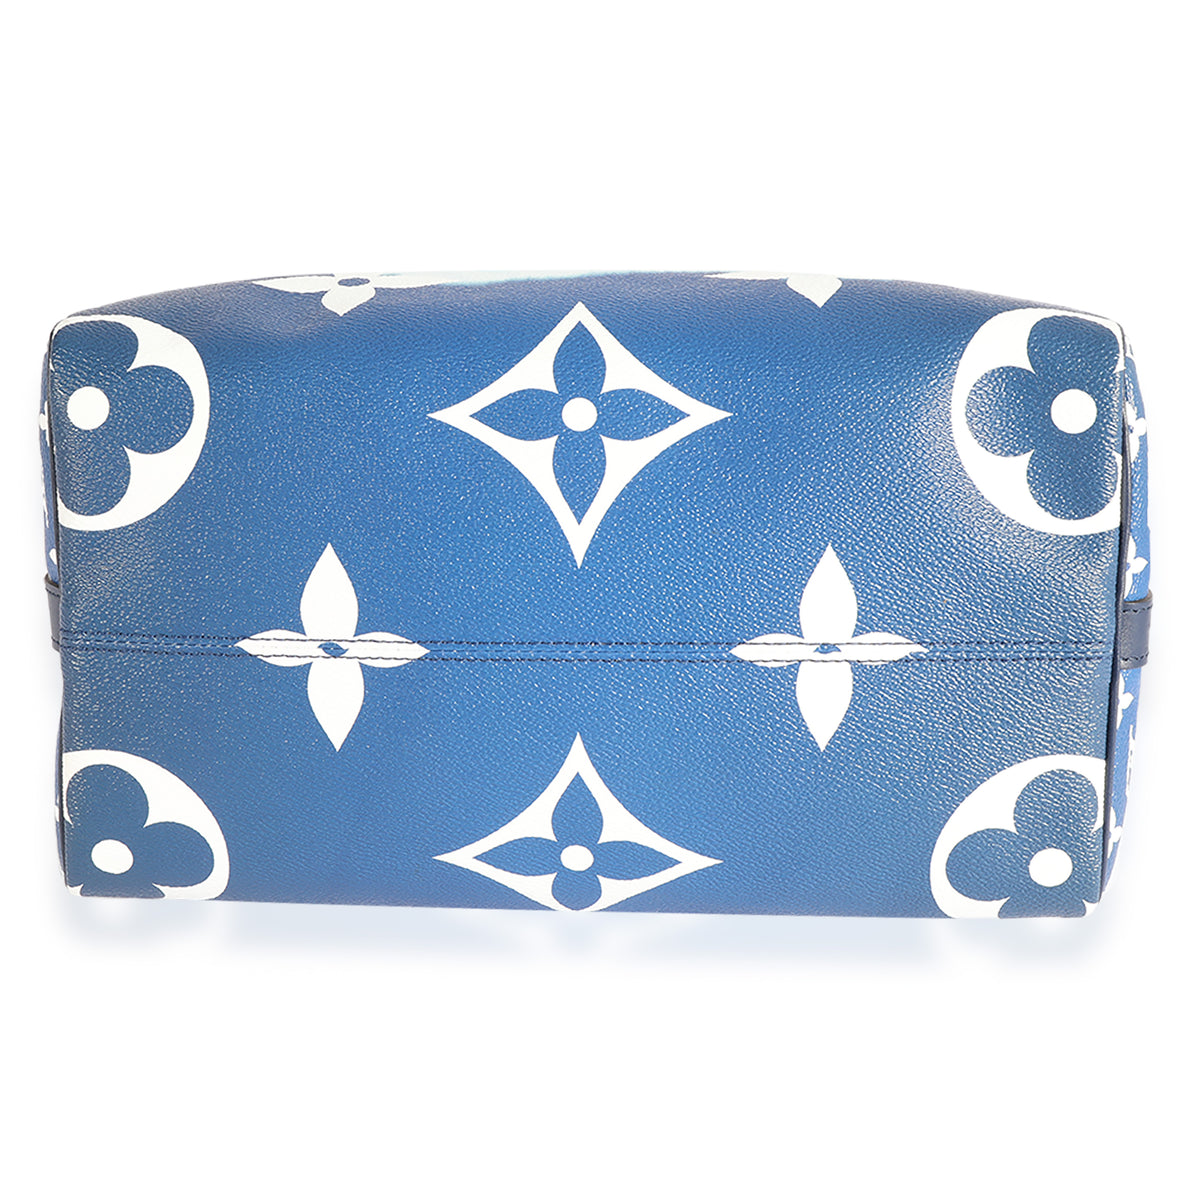 Louis Vuitton Cosmetic Pouch LV Escale Bleu in Coated Canvas